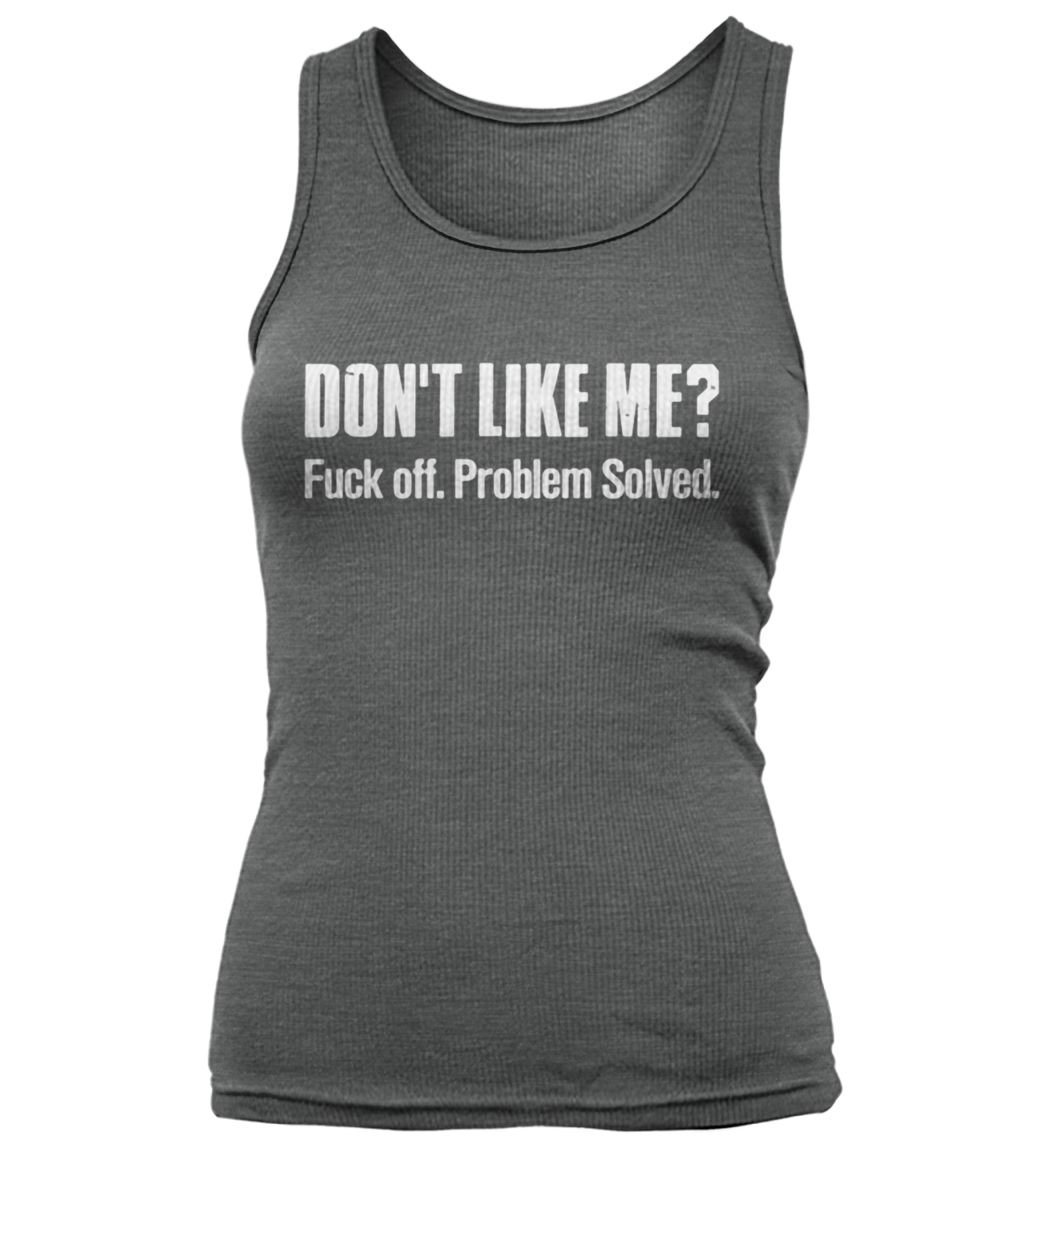 Don't like me fuck off problem solved women's tank top